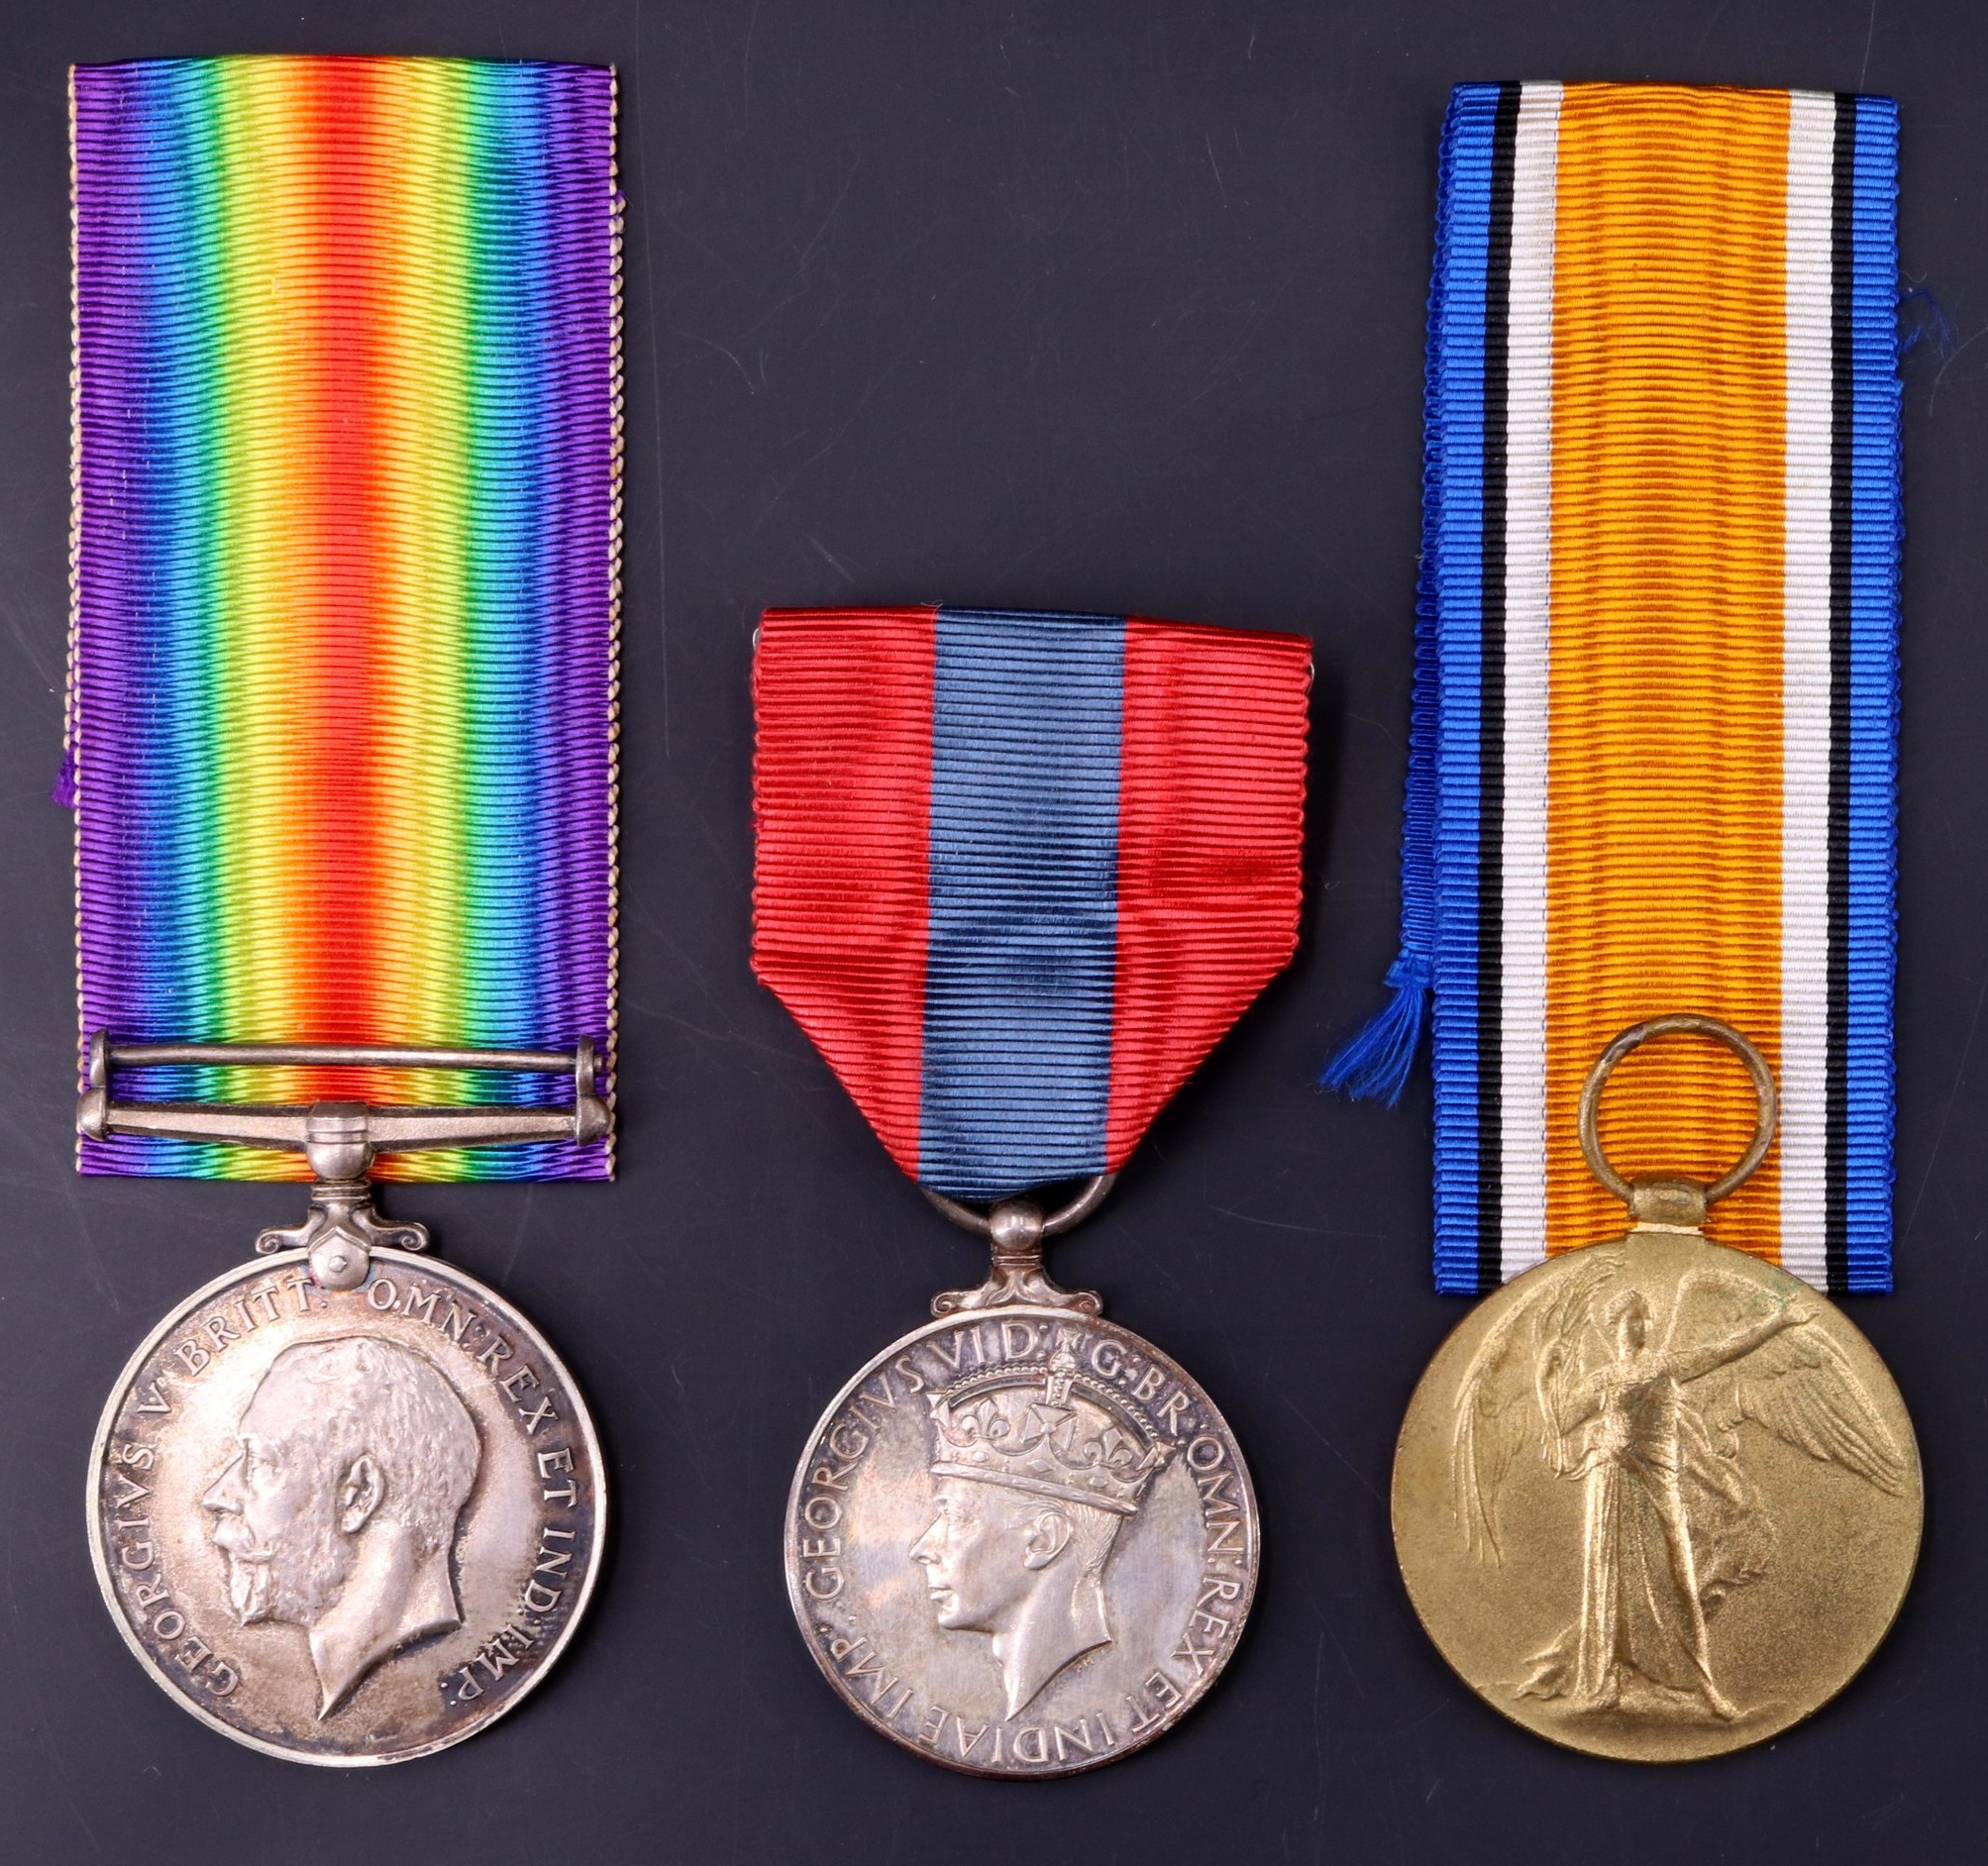 British War and Victory Medals together with a George VI Imperial Service Medal to 25243 Pte